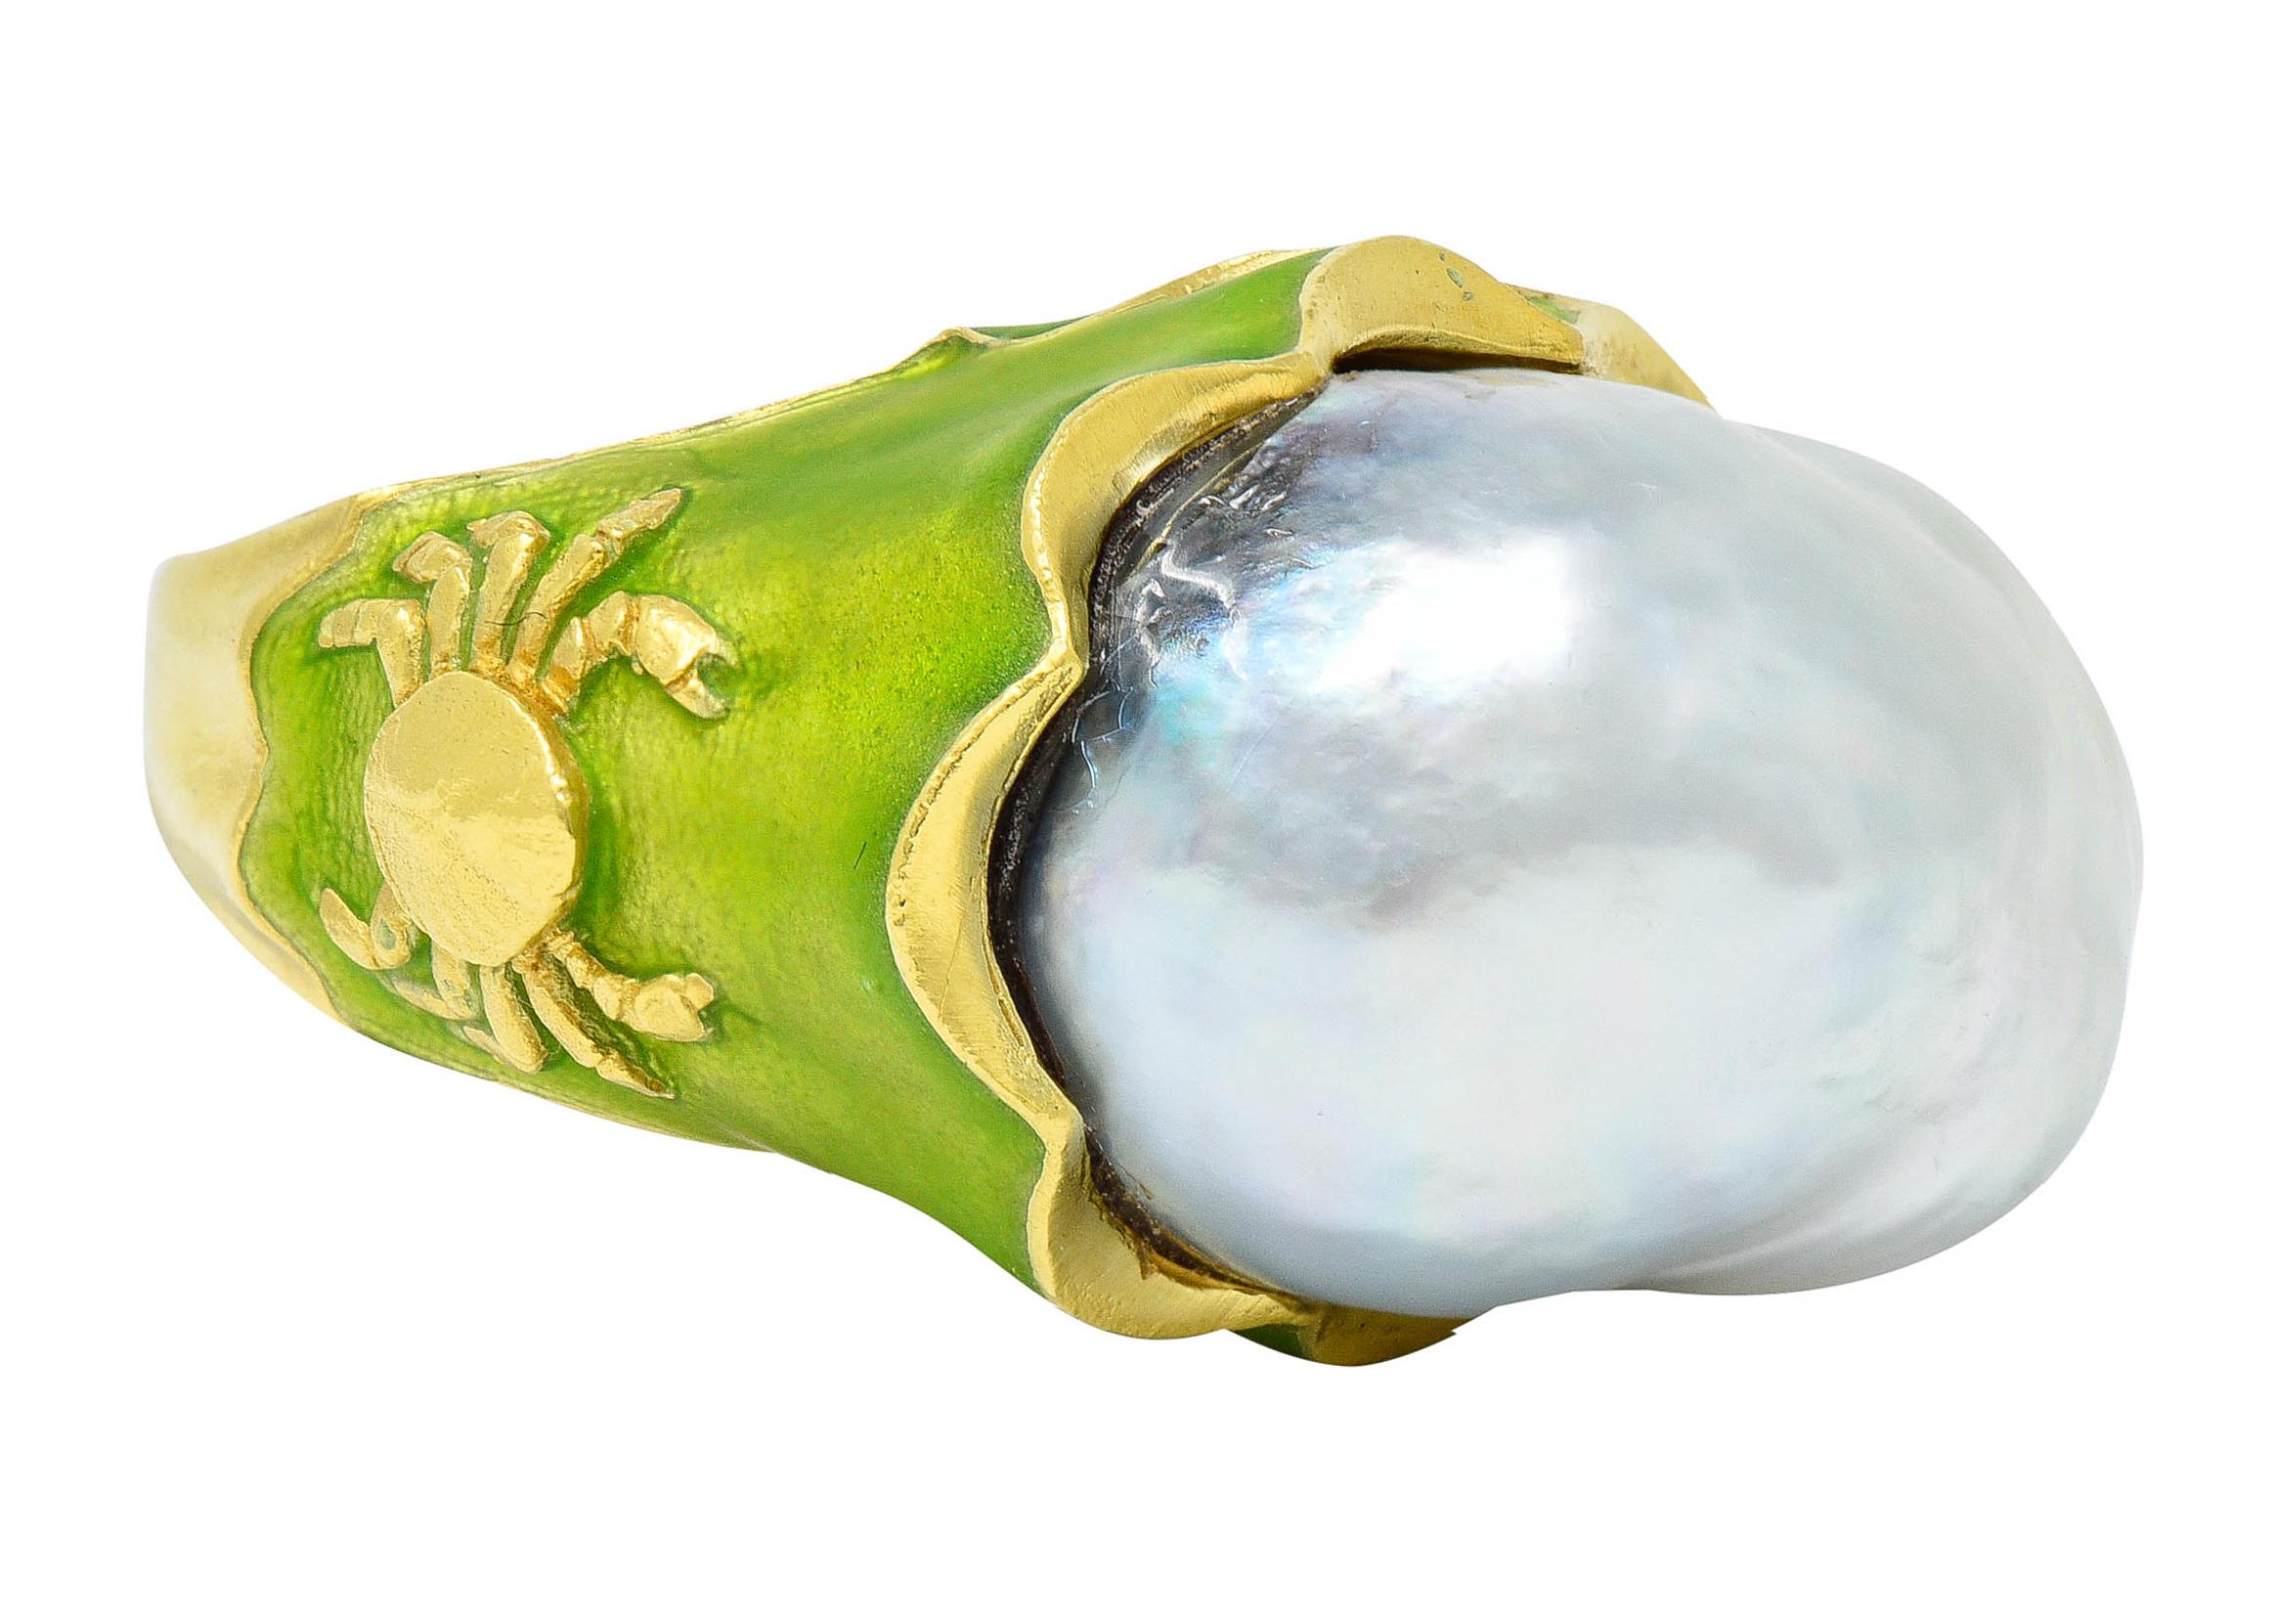 Ring centers a substantial baroque pearl measuring approximately 16.3 x 21.0 mm

Gray in body color with strong iridescence and excellent luster

Belcher set in a stylized mount accented by highly rendered motifs of a crab and sea horses

Glossed